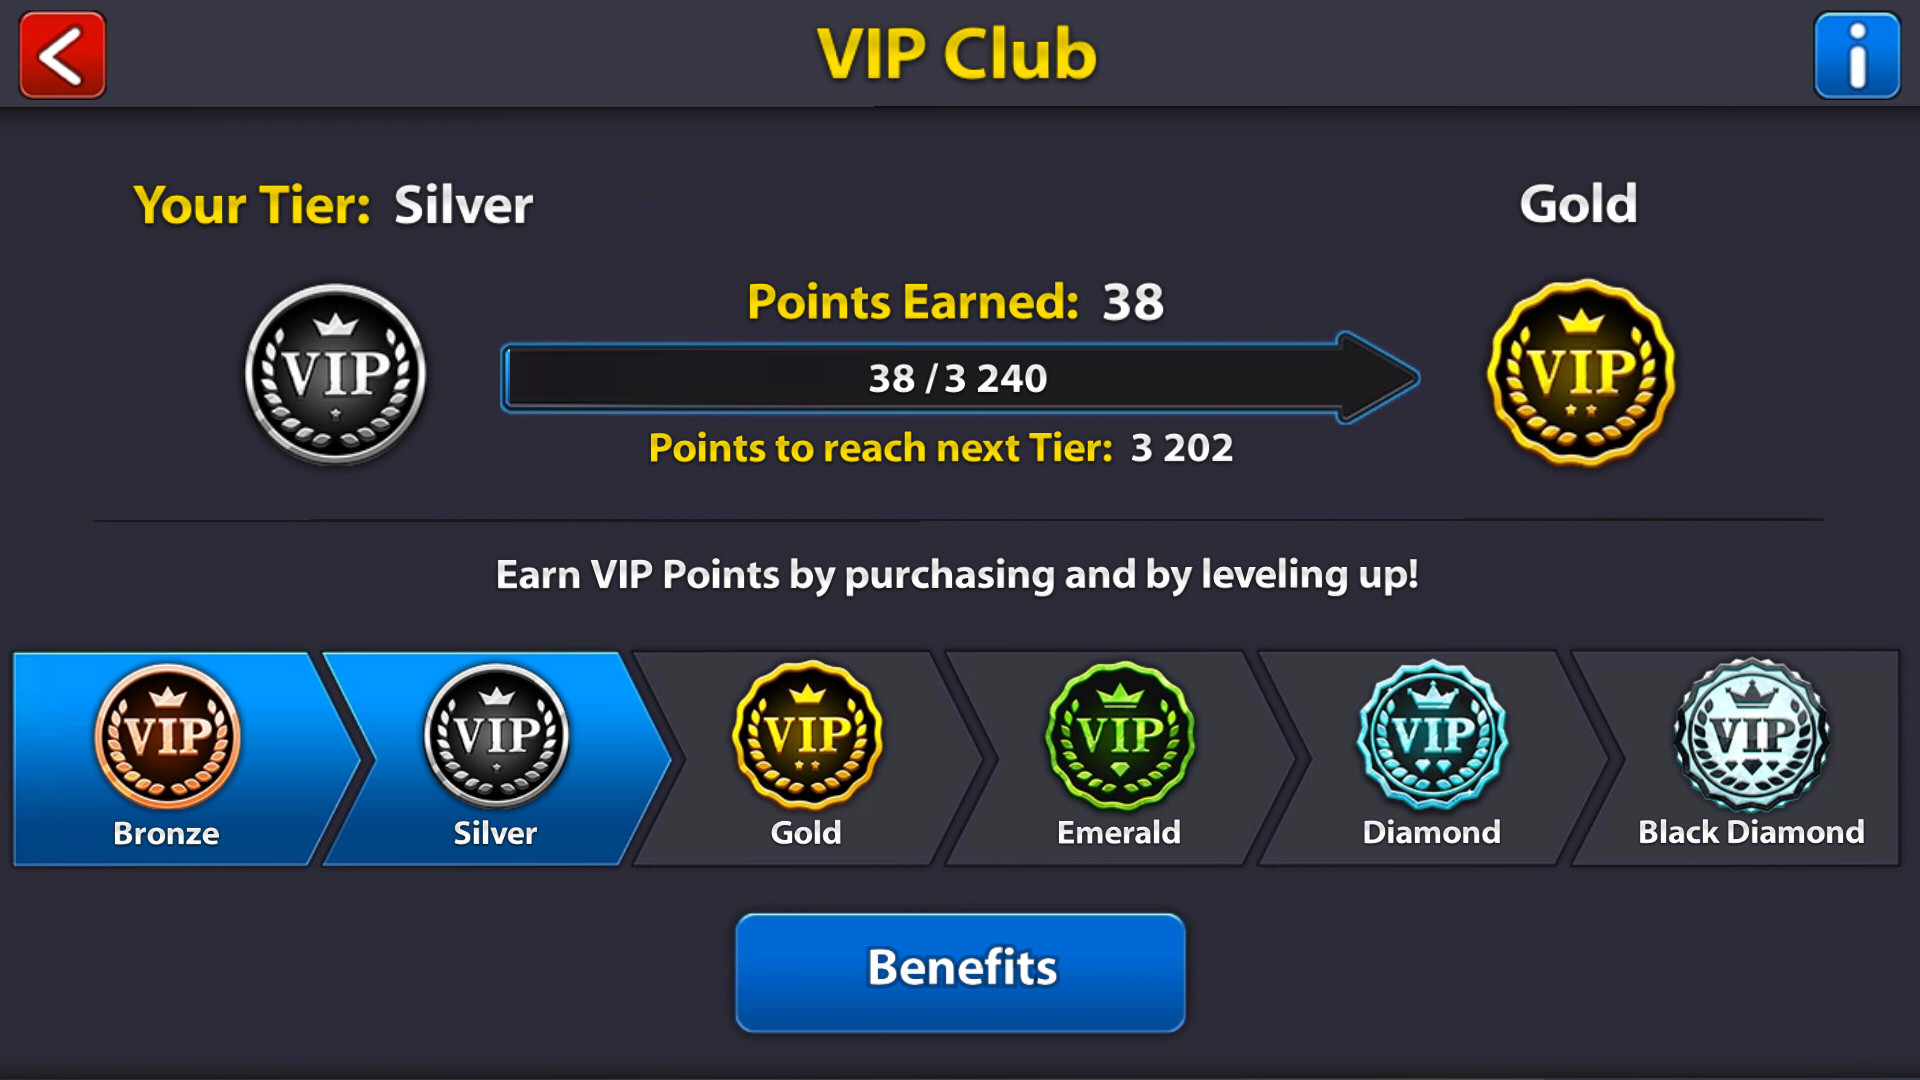 Introducing the VIP Club